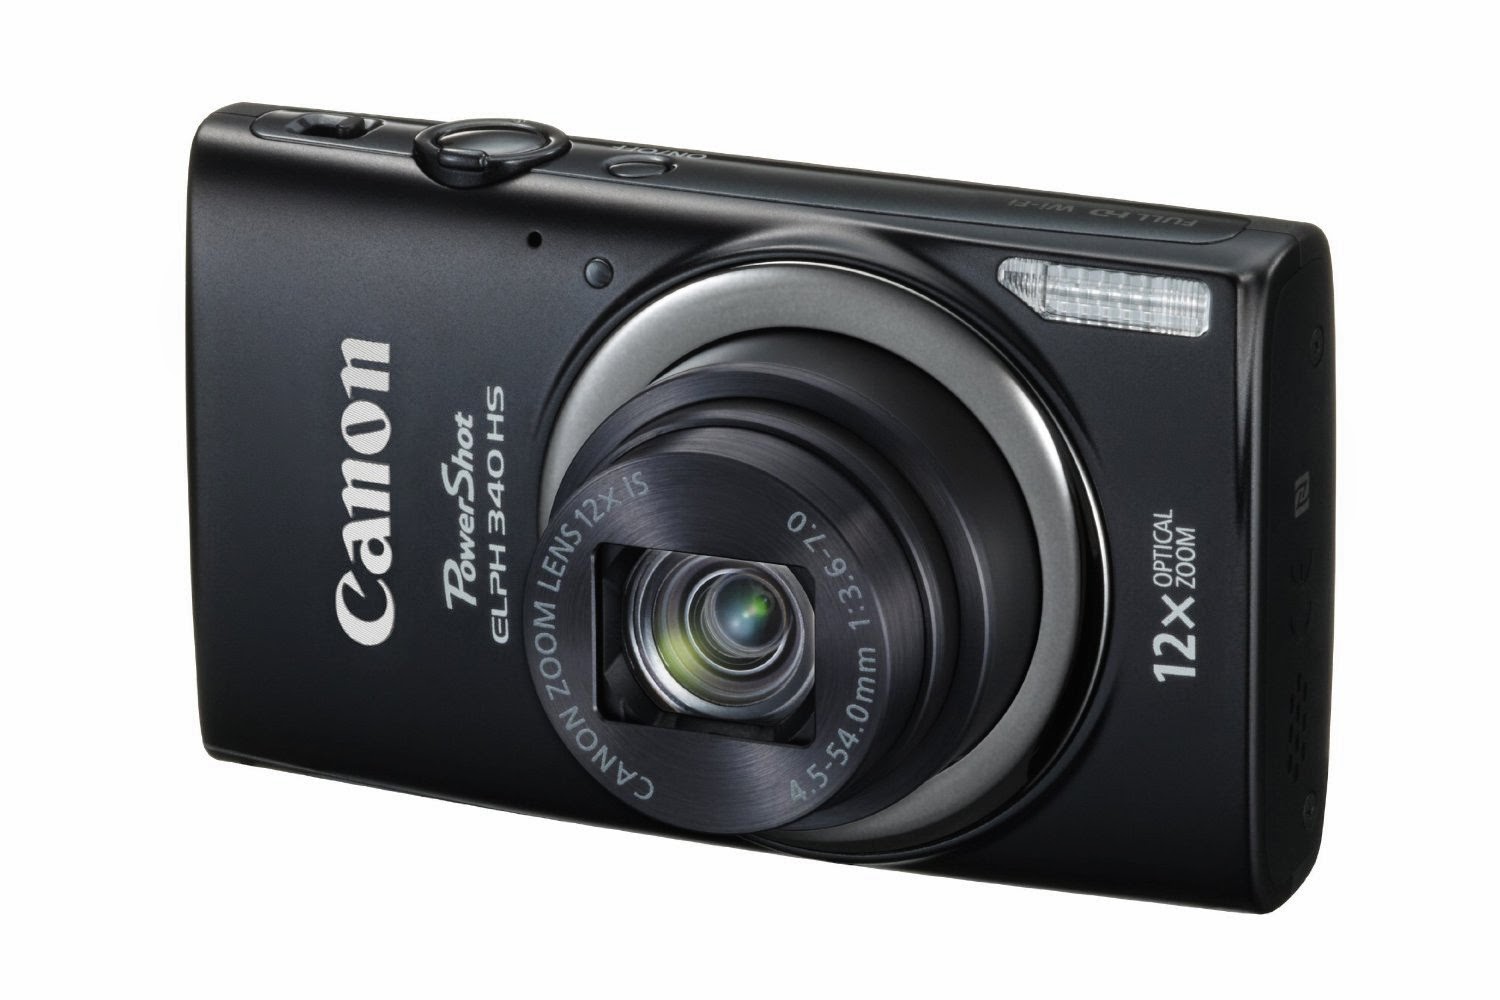 Canon PowerShot ELPH 340 HS 16 MP Digital Camera, black, review, ultra compact slim lightweight point and shoot digital camera with image stabilization